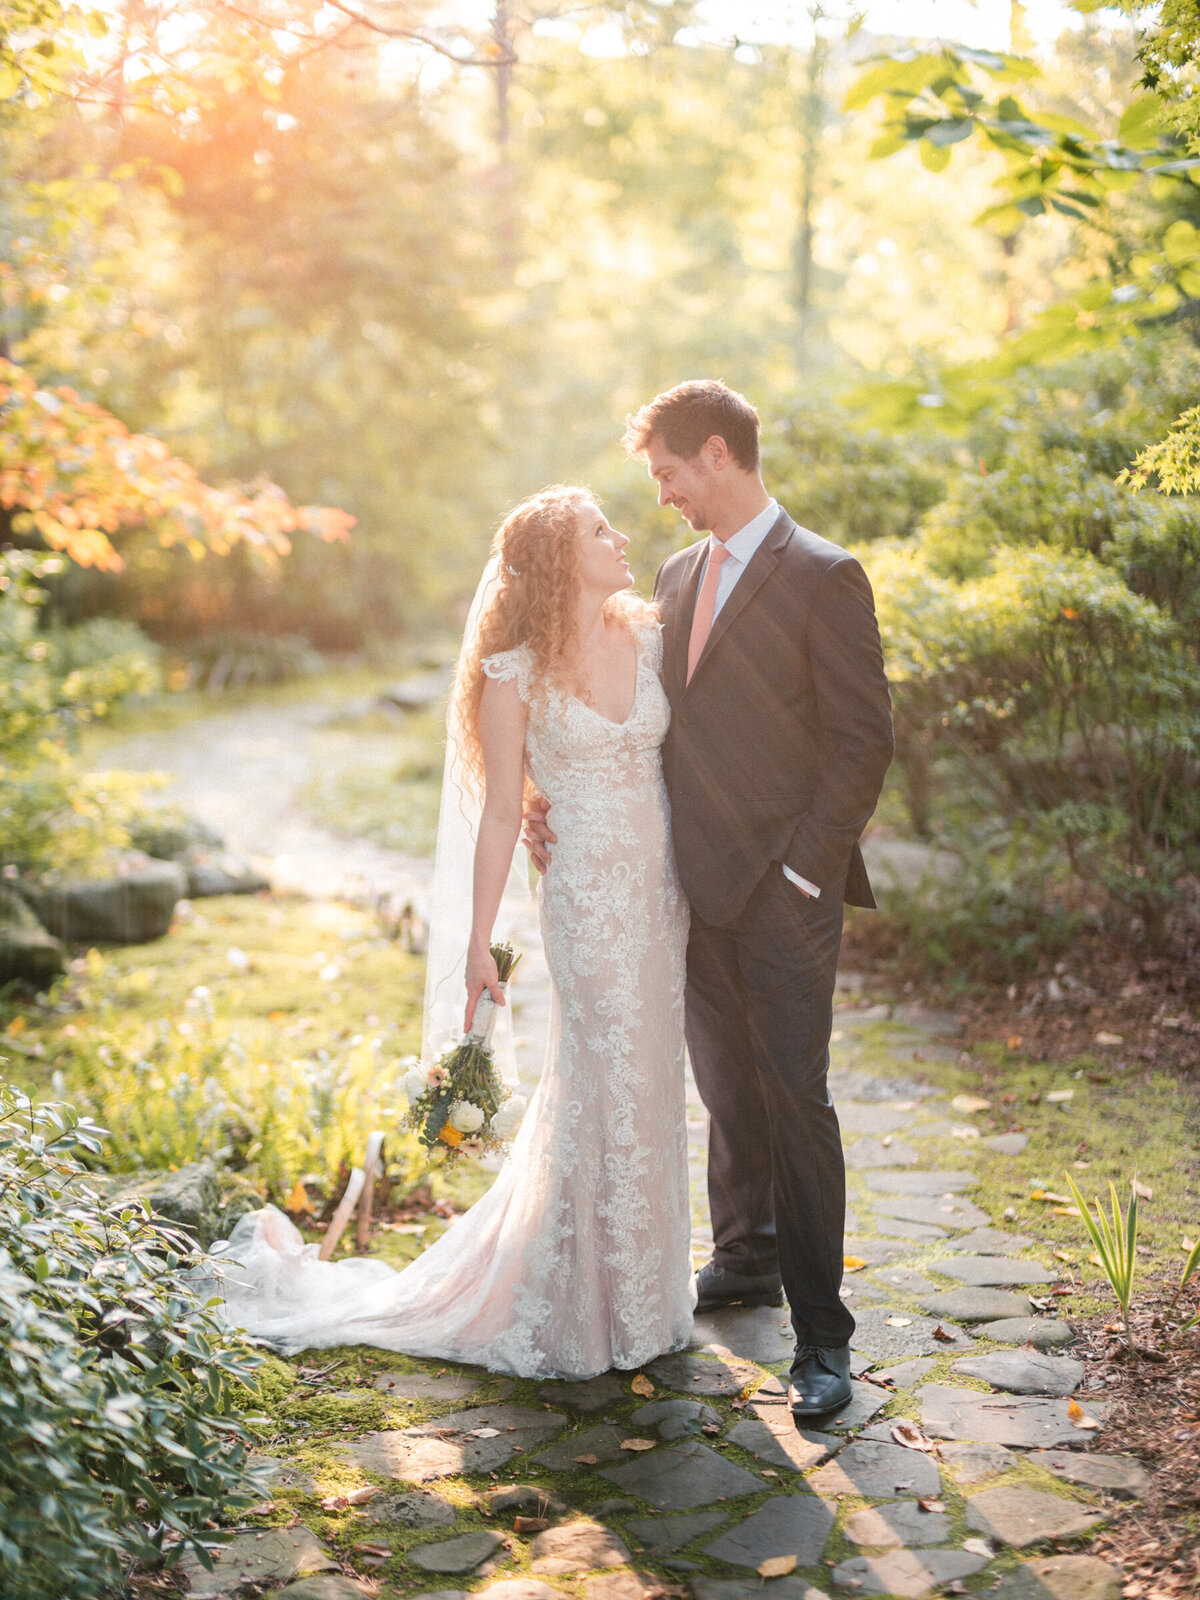 Bride and groom bathed in golden sunlight in a lush garden, sharing a tender moment on a cobblestone path